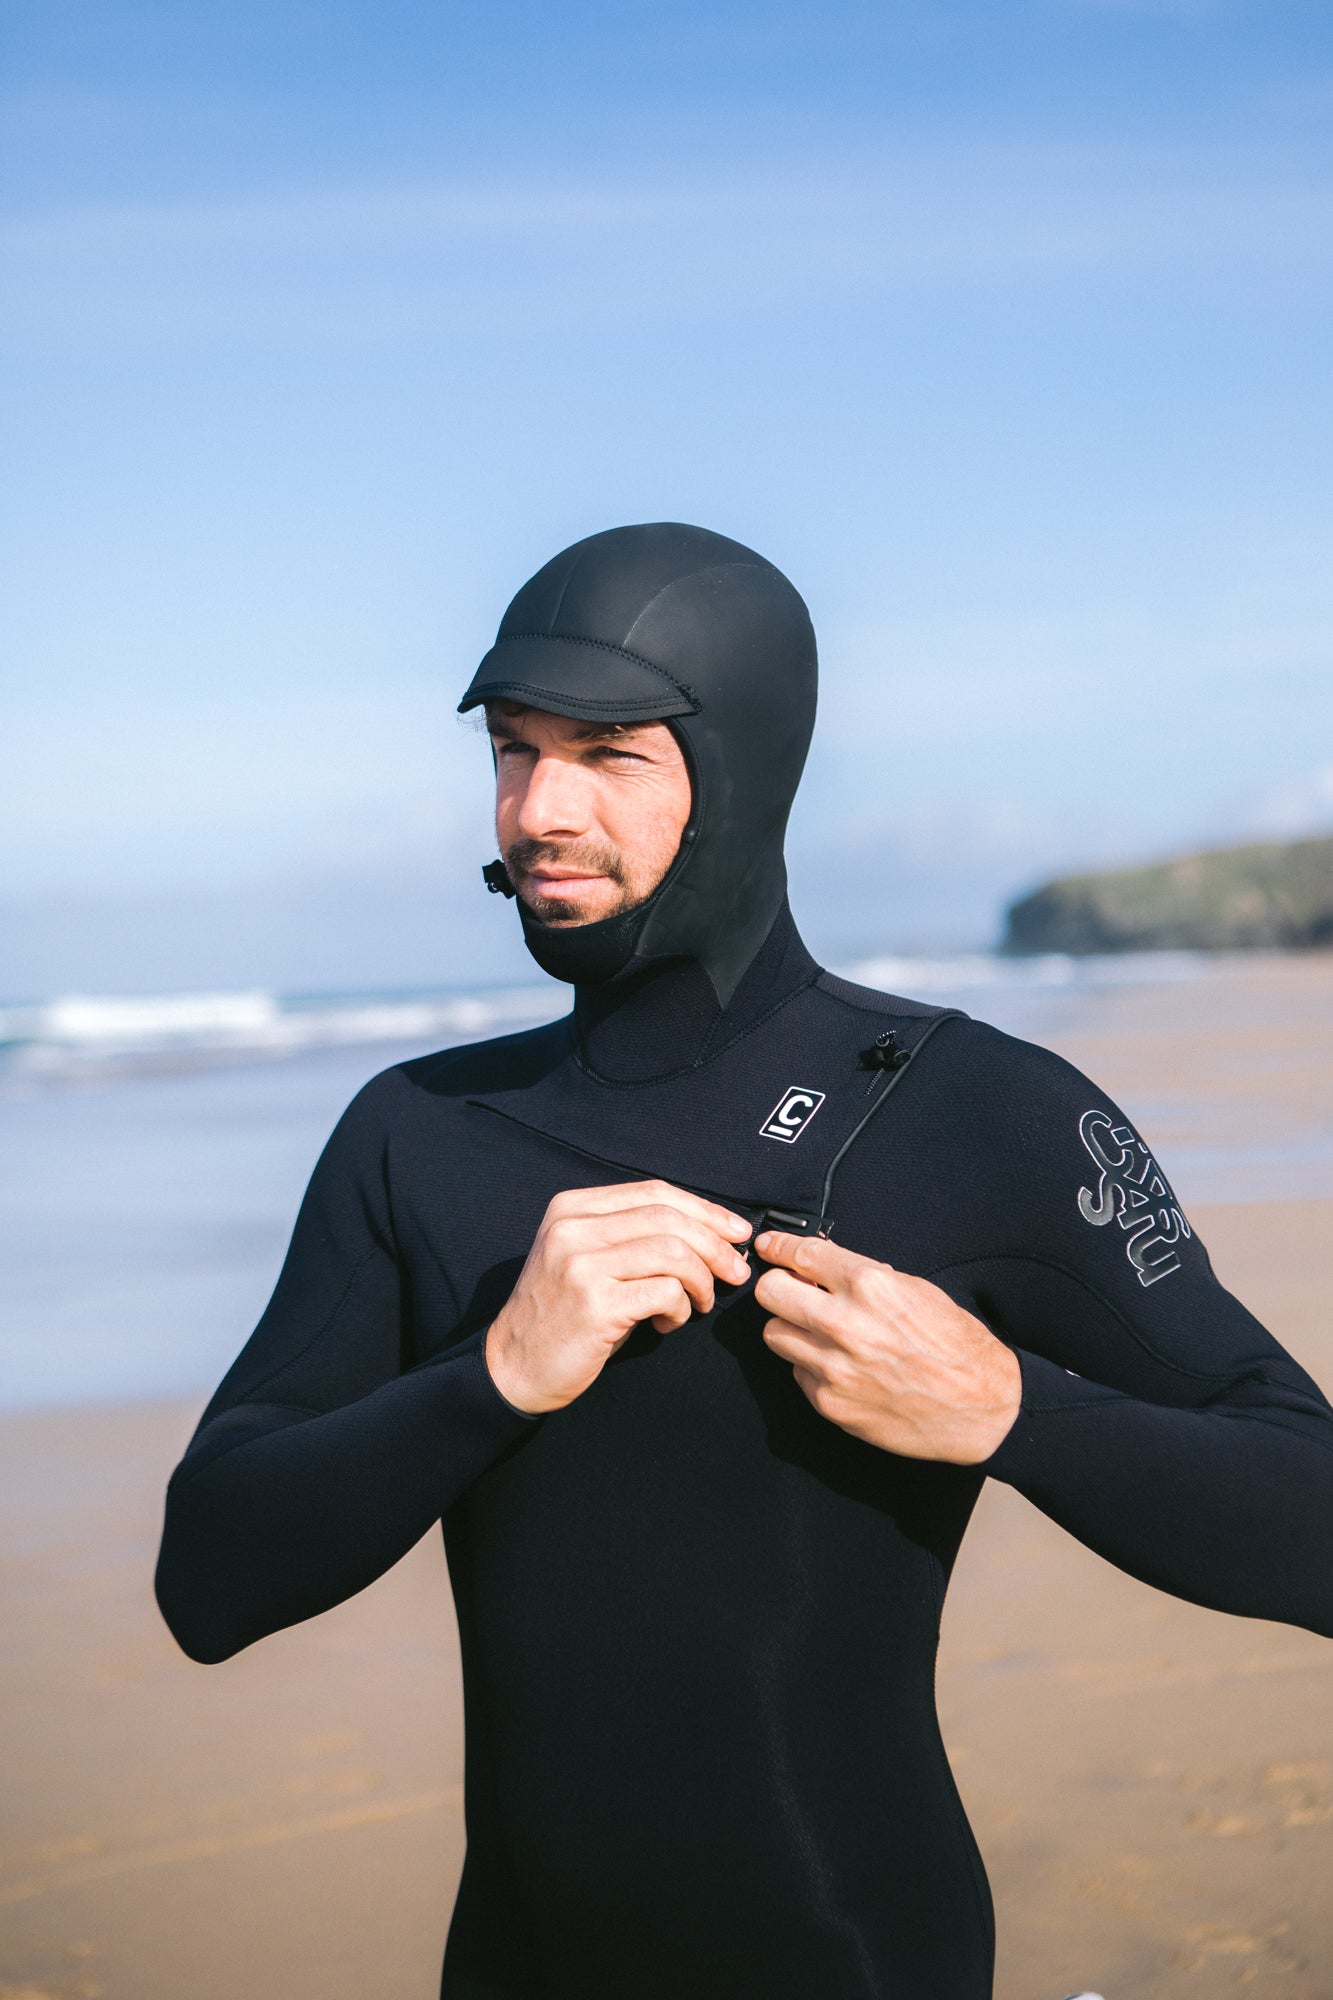 c-skins-session-5-4-hooded-winter-wetsuit-men-halo-x-x-tend-tape-lifestyle-hooded